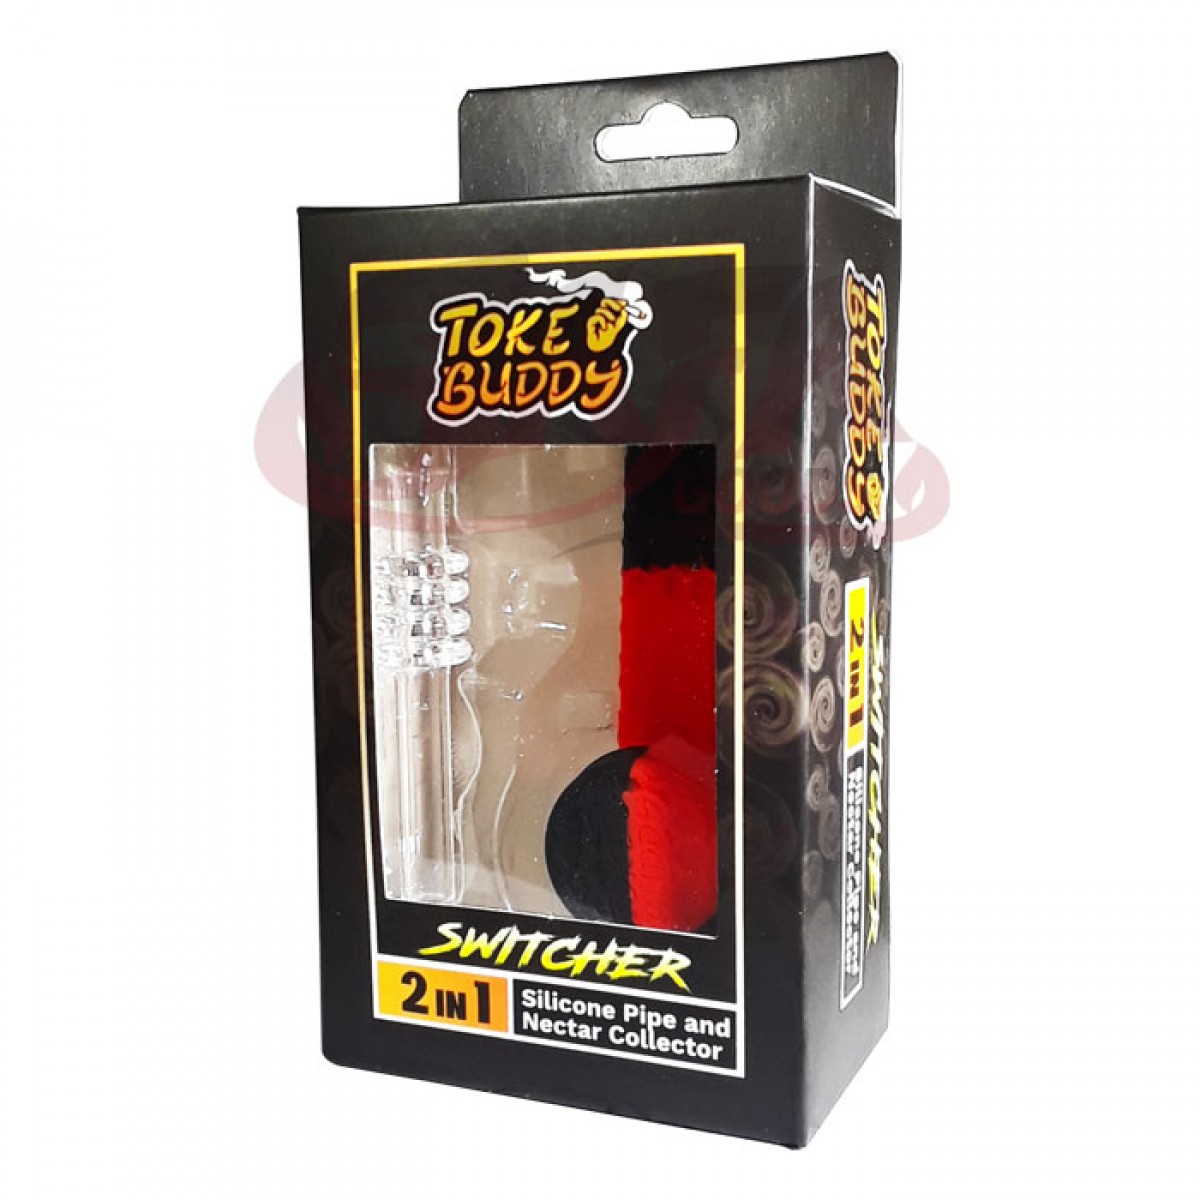 Toke Buddy Switcher - Silicone Hand Pipe/Nectar Collector